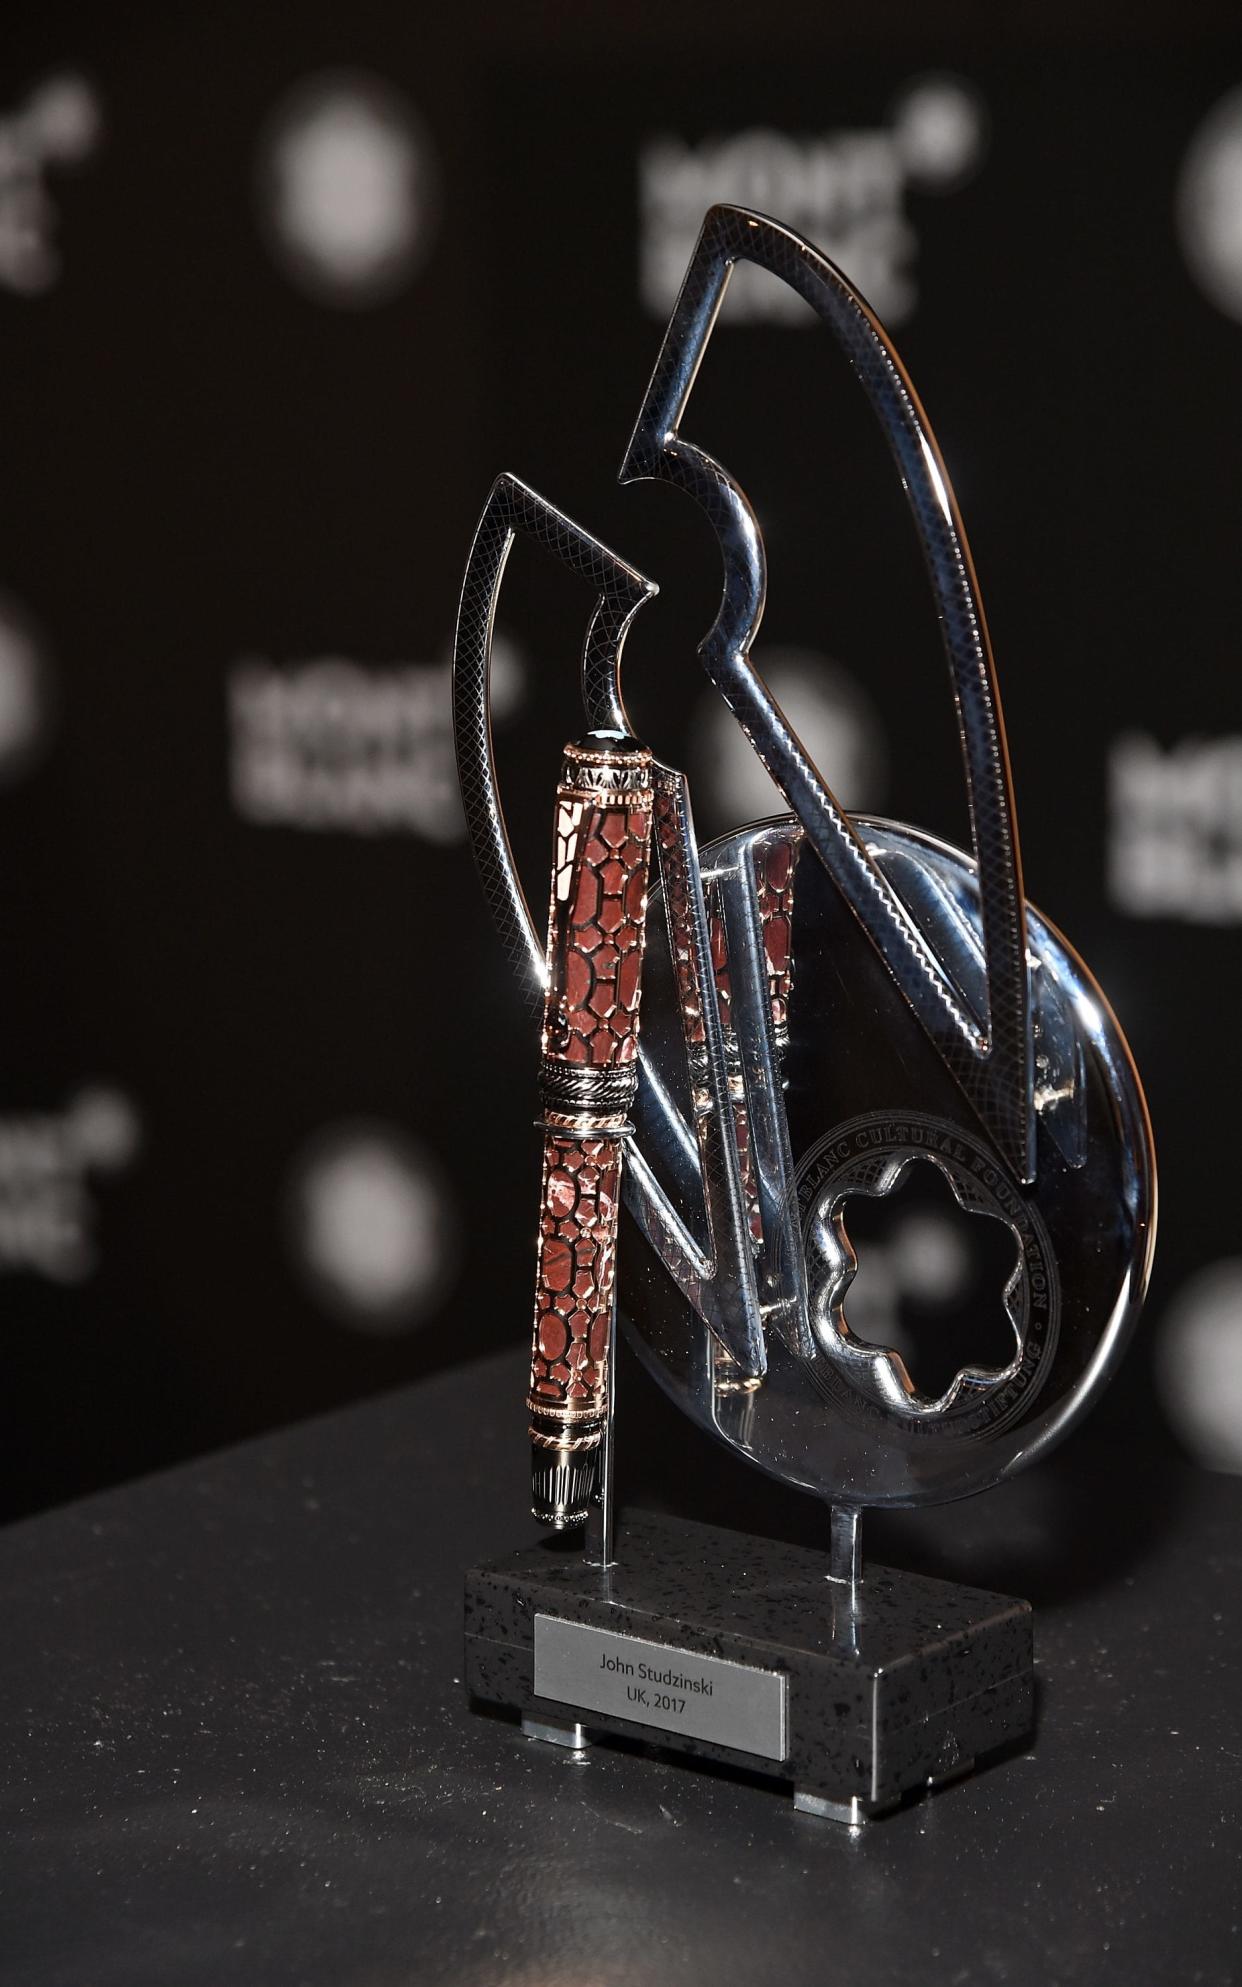 The 2017 limited-edition Montblanc Patron of Art pen, awarded to all of this year's winners of the Montblanc de la Culture Arts Patronage Award - 2017 David M. Benett